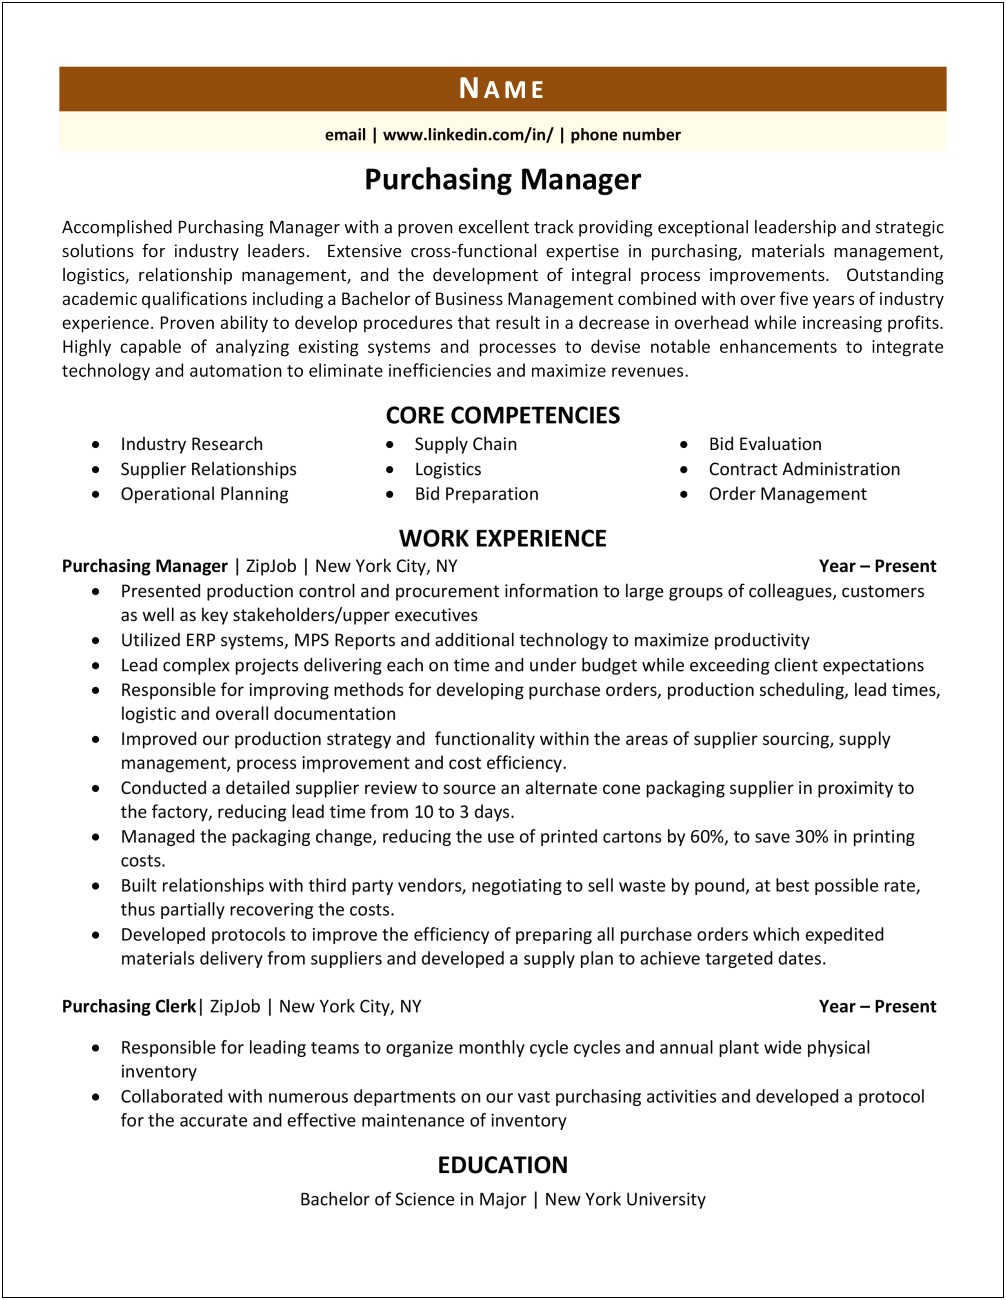 Resume Summary Example For Purchasing Manager